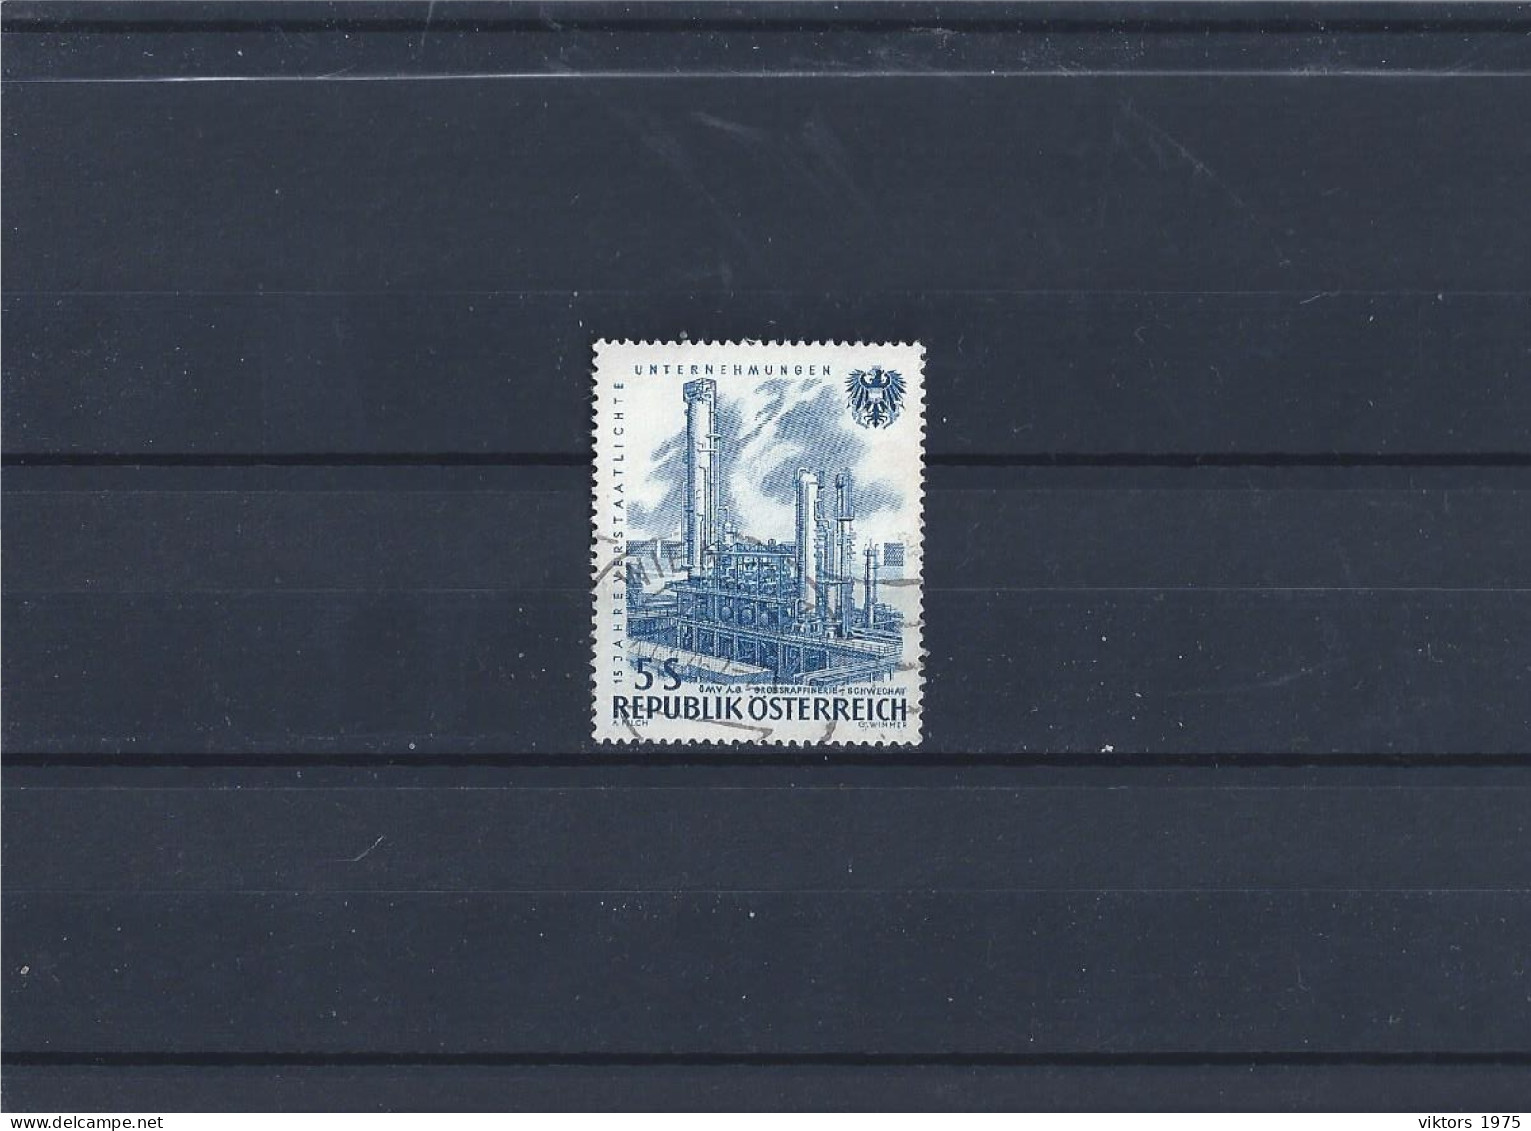 Used Stamp Nr.1096 In MICHEL Catalog - Used Stamps